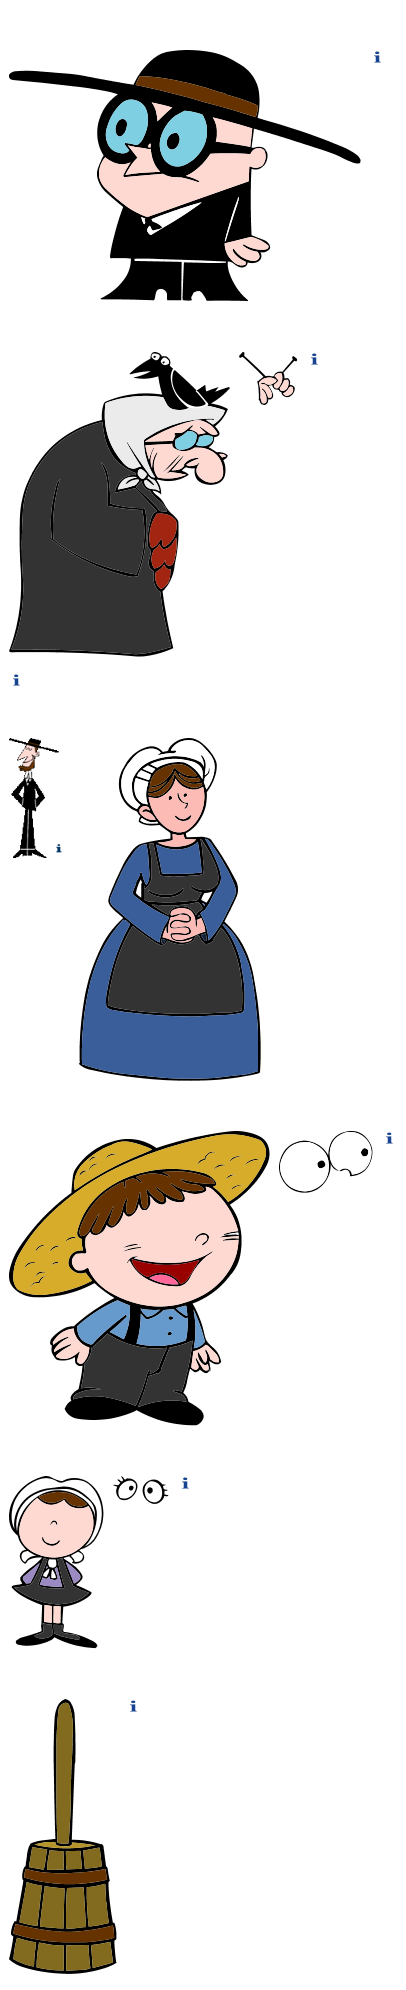 Ol' McDexter (Amish Episode) Characters